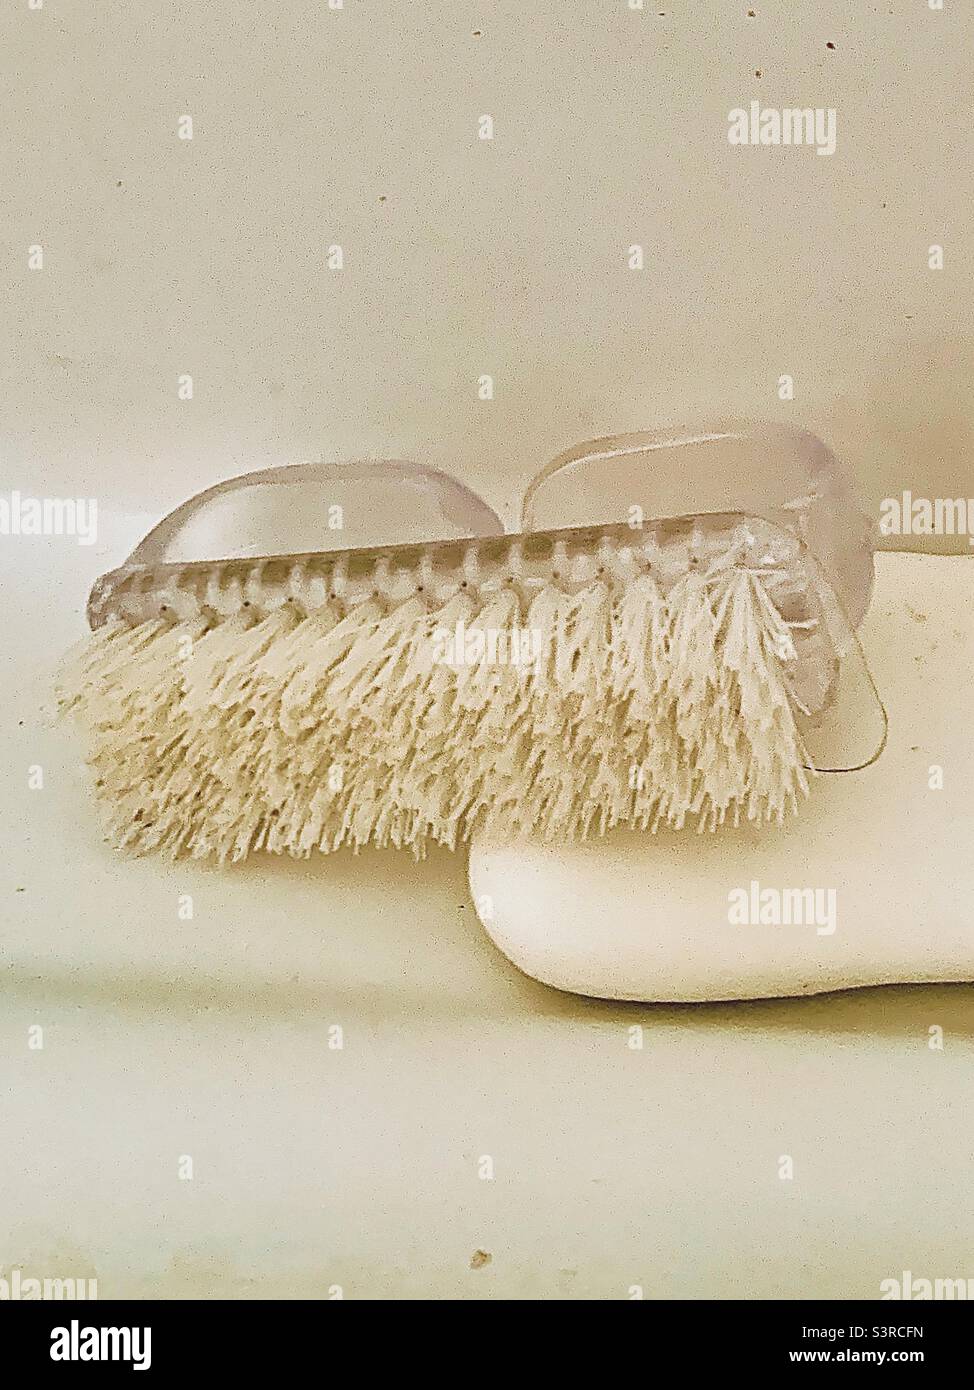 White bar of soap and scrub brush on white background with negative space Stock Photo